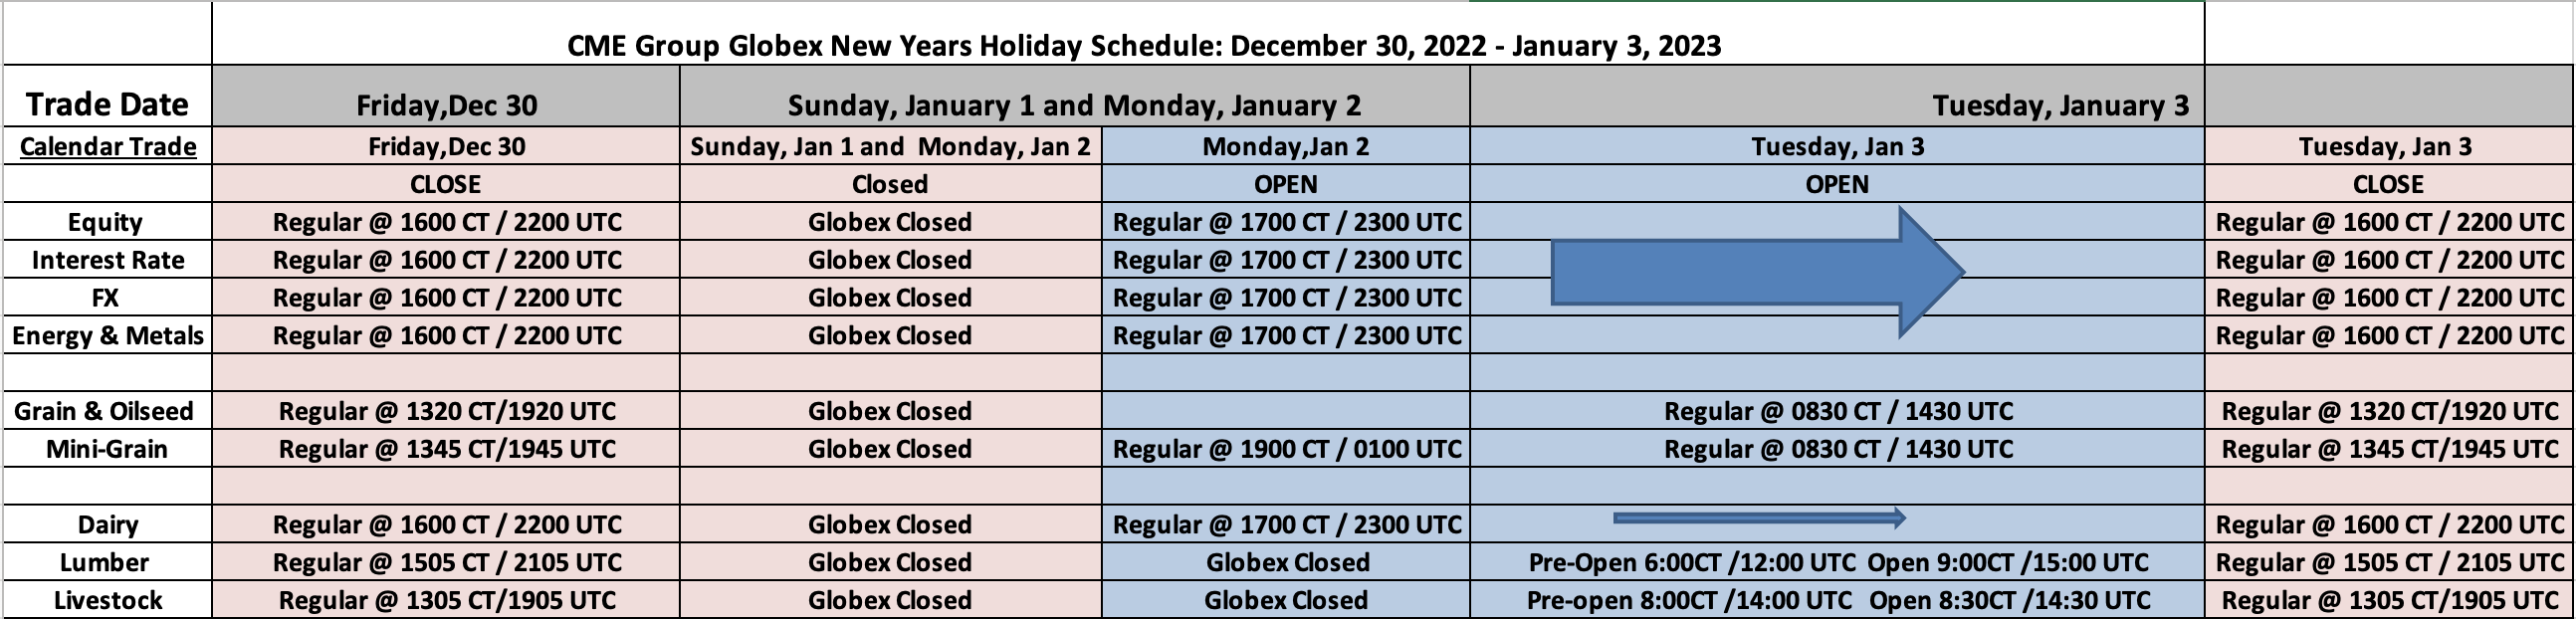 CME Group Globex New Years Holiday Tradig Schedule - December 30, 2022 - January 3, 2023